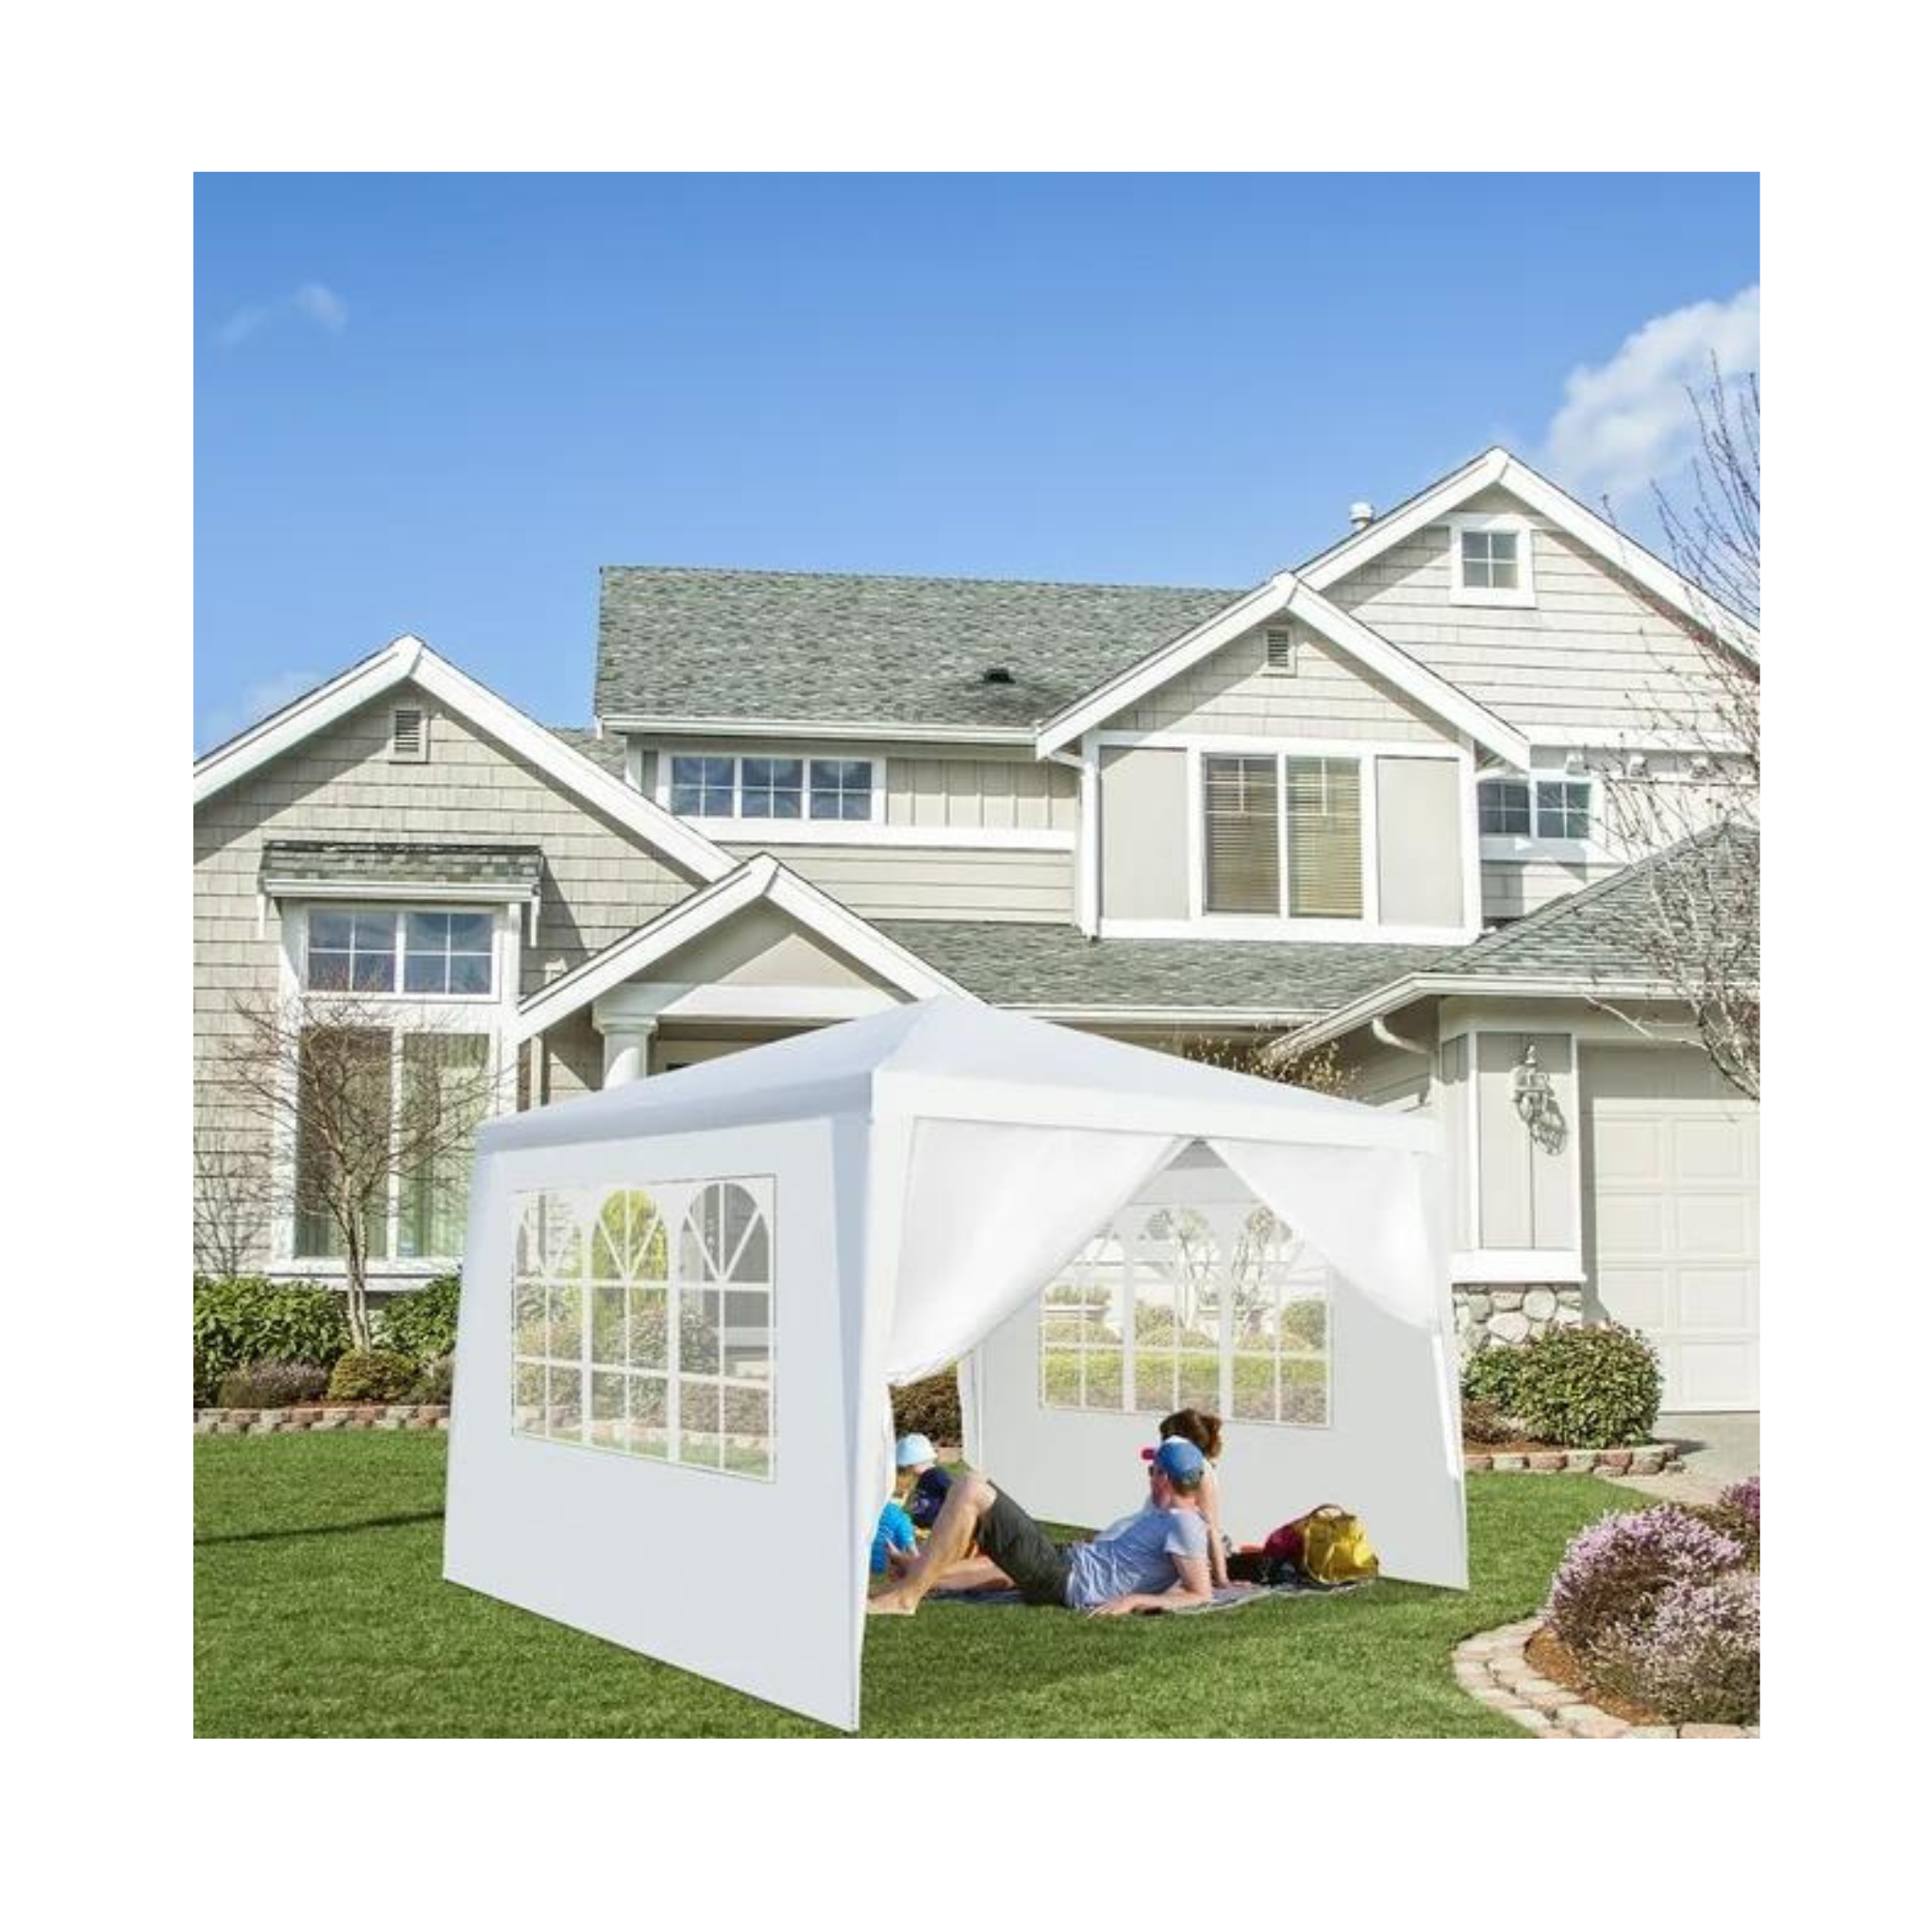 Outdoor 10'x 10' Or 10'x 20' Party Tents On Sale